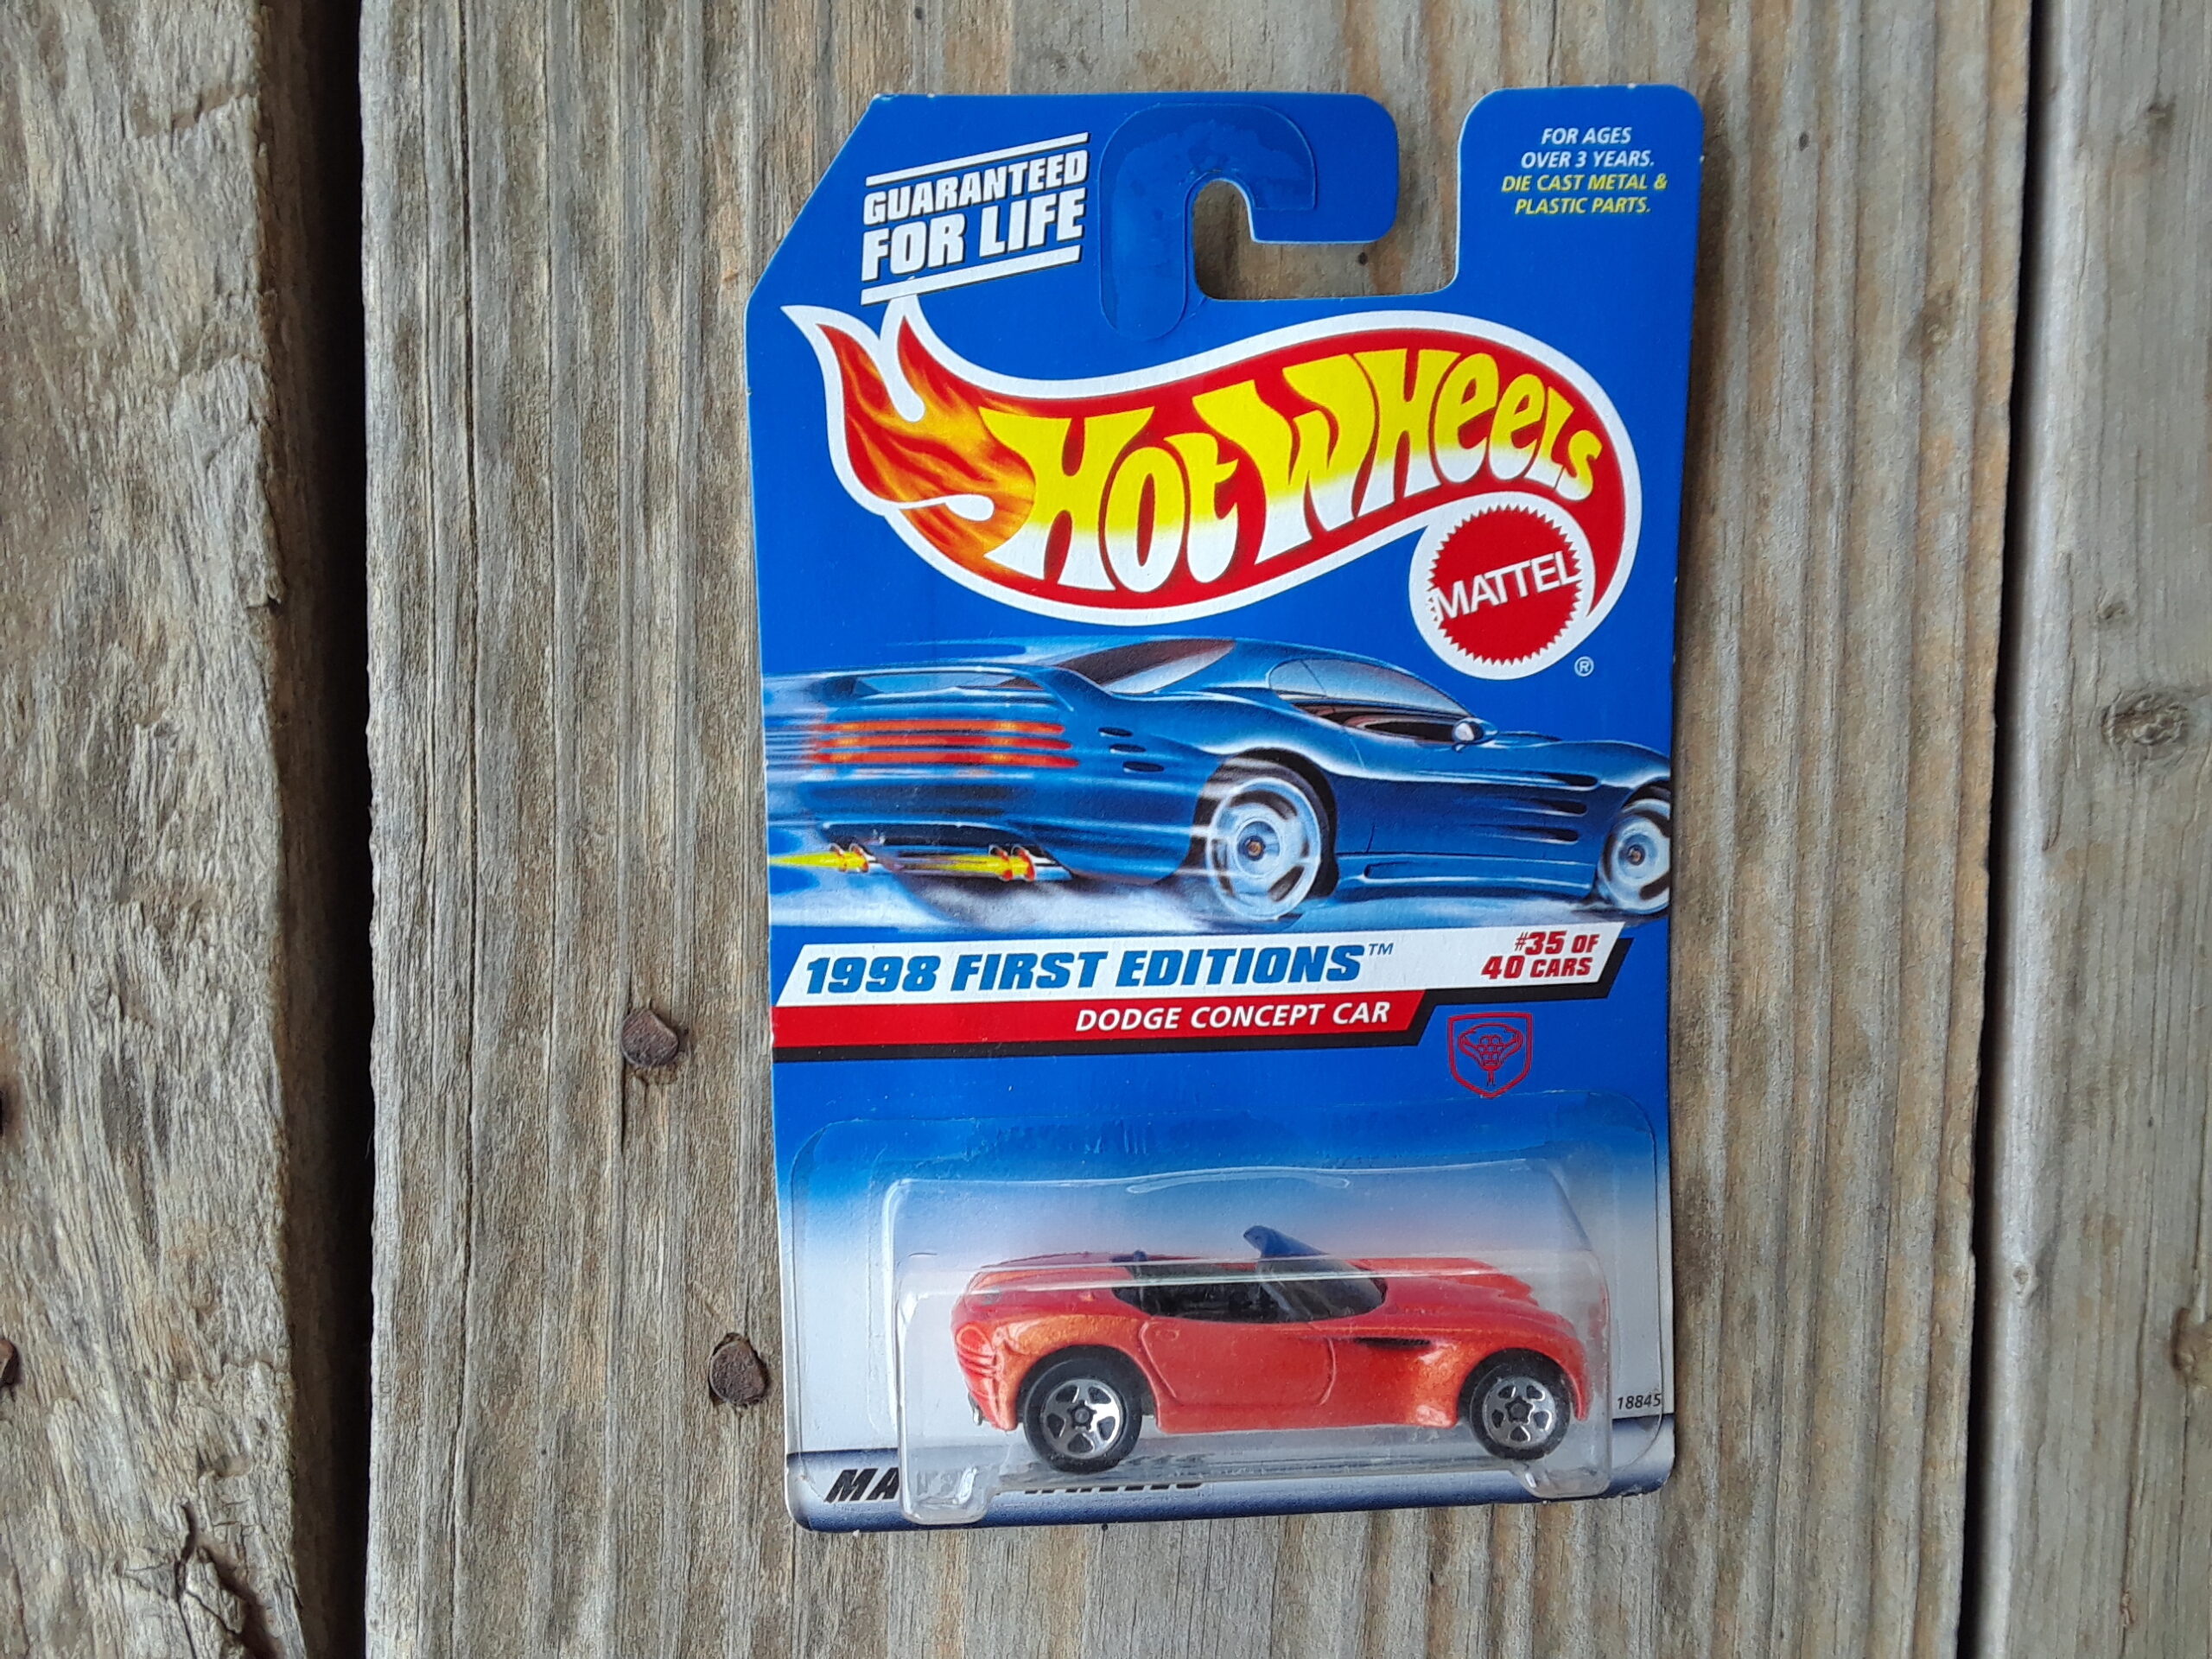 Hot Wheels 1998 First Editions Dodge Concept Car